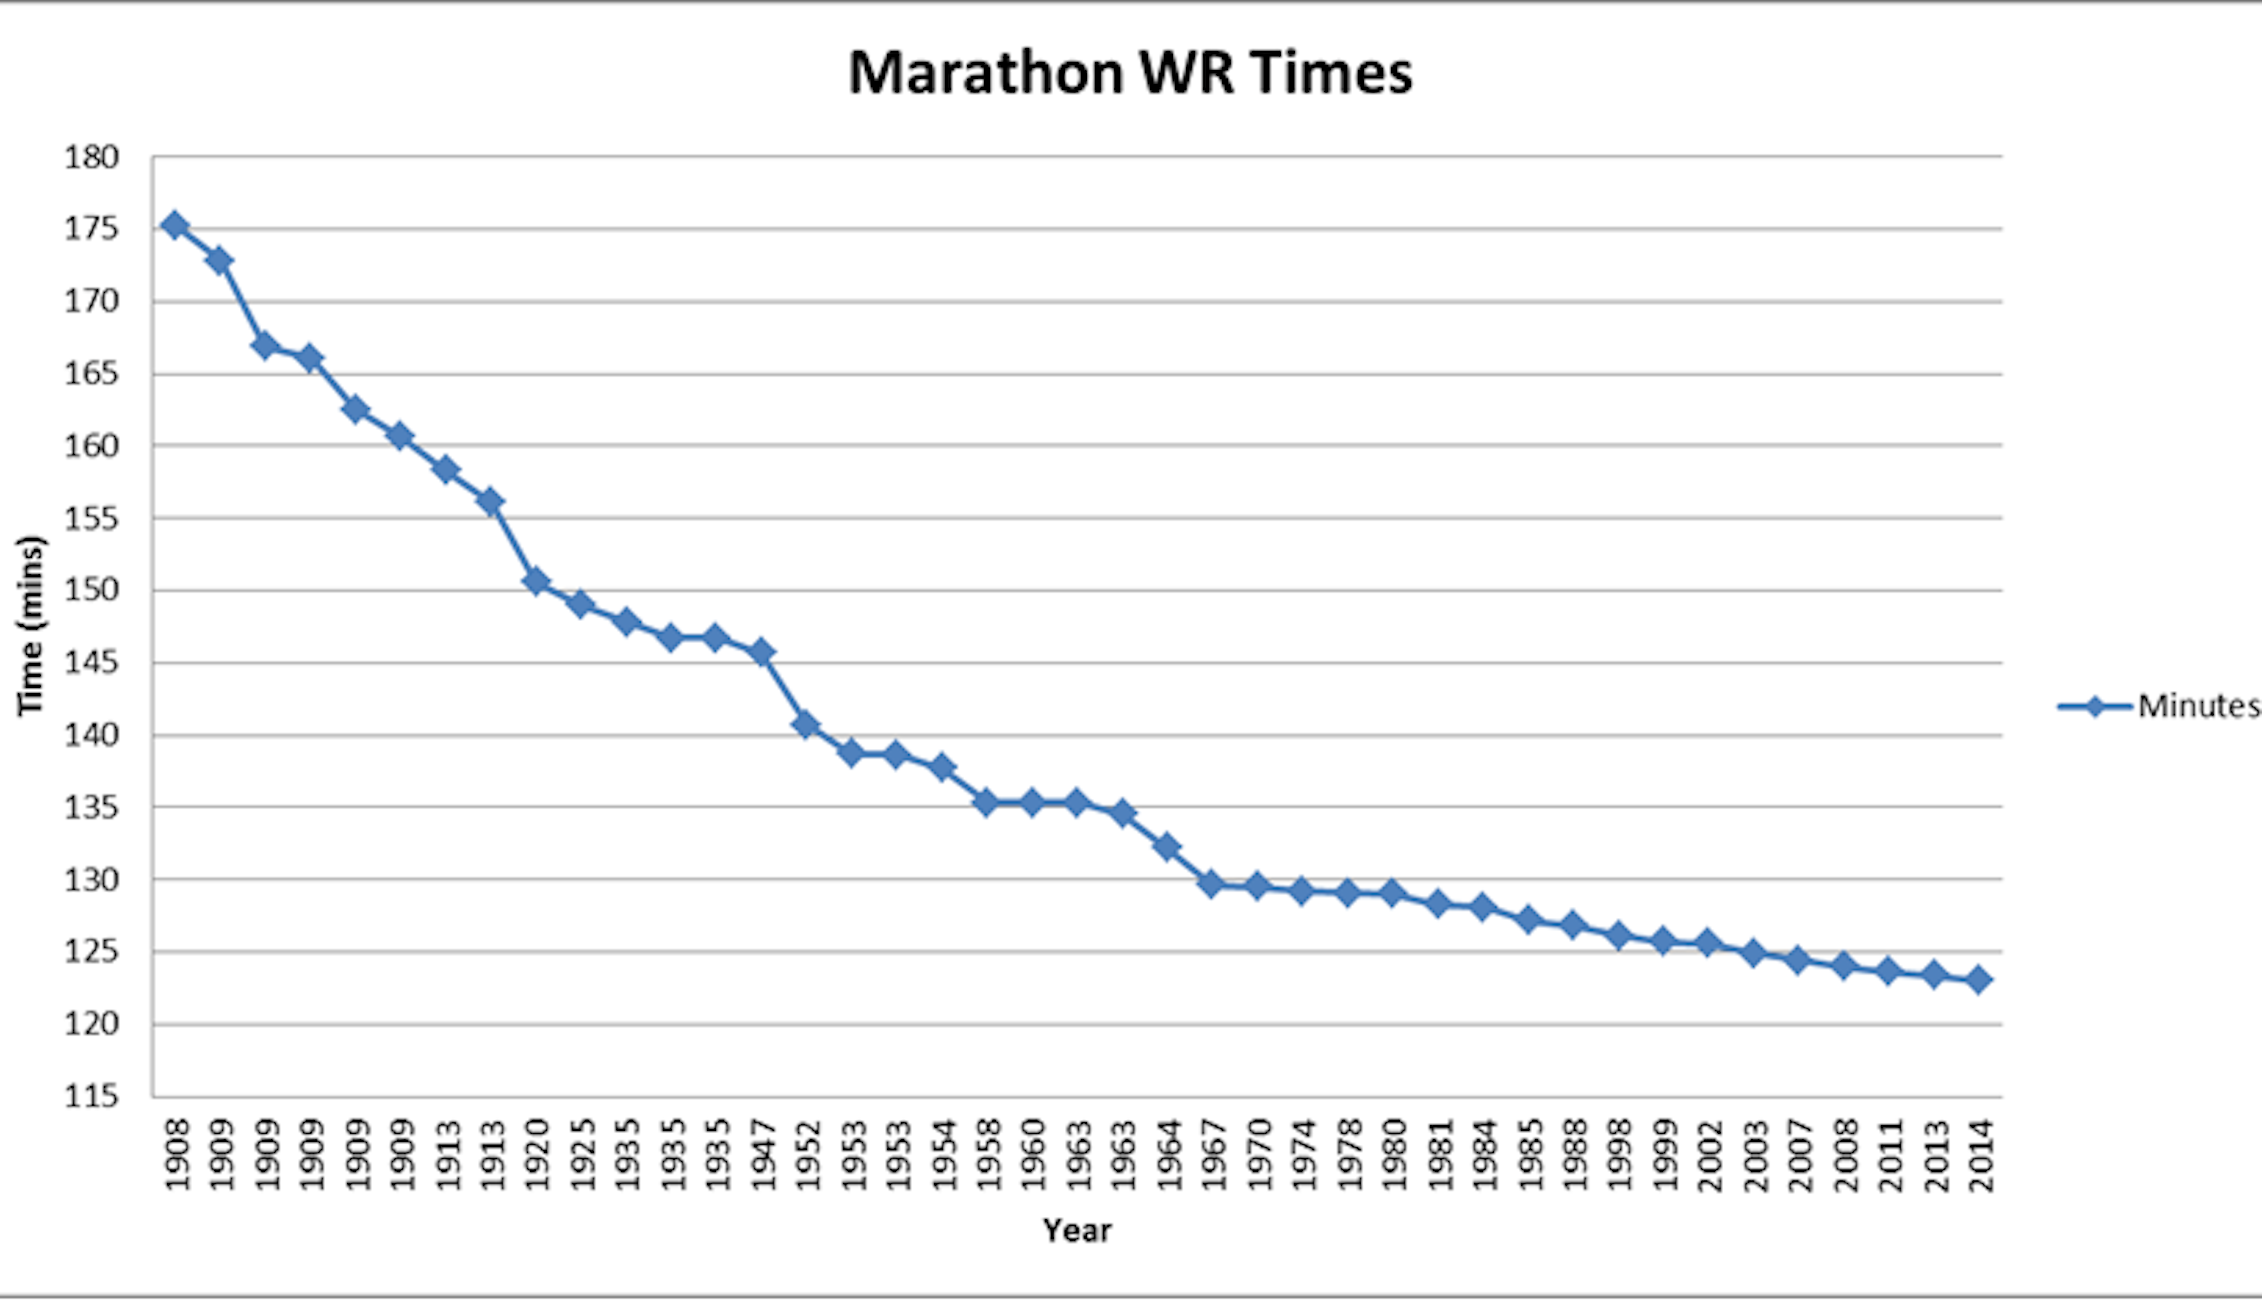 How low can marathon times go?